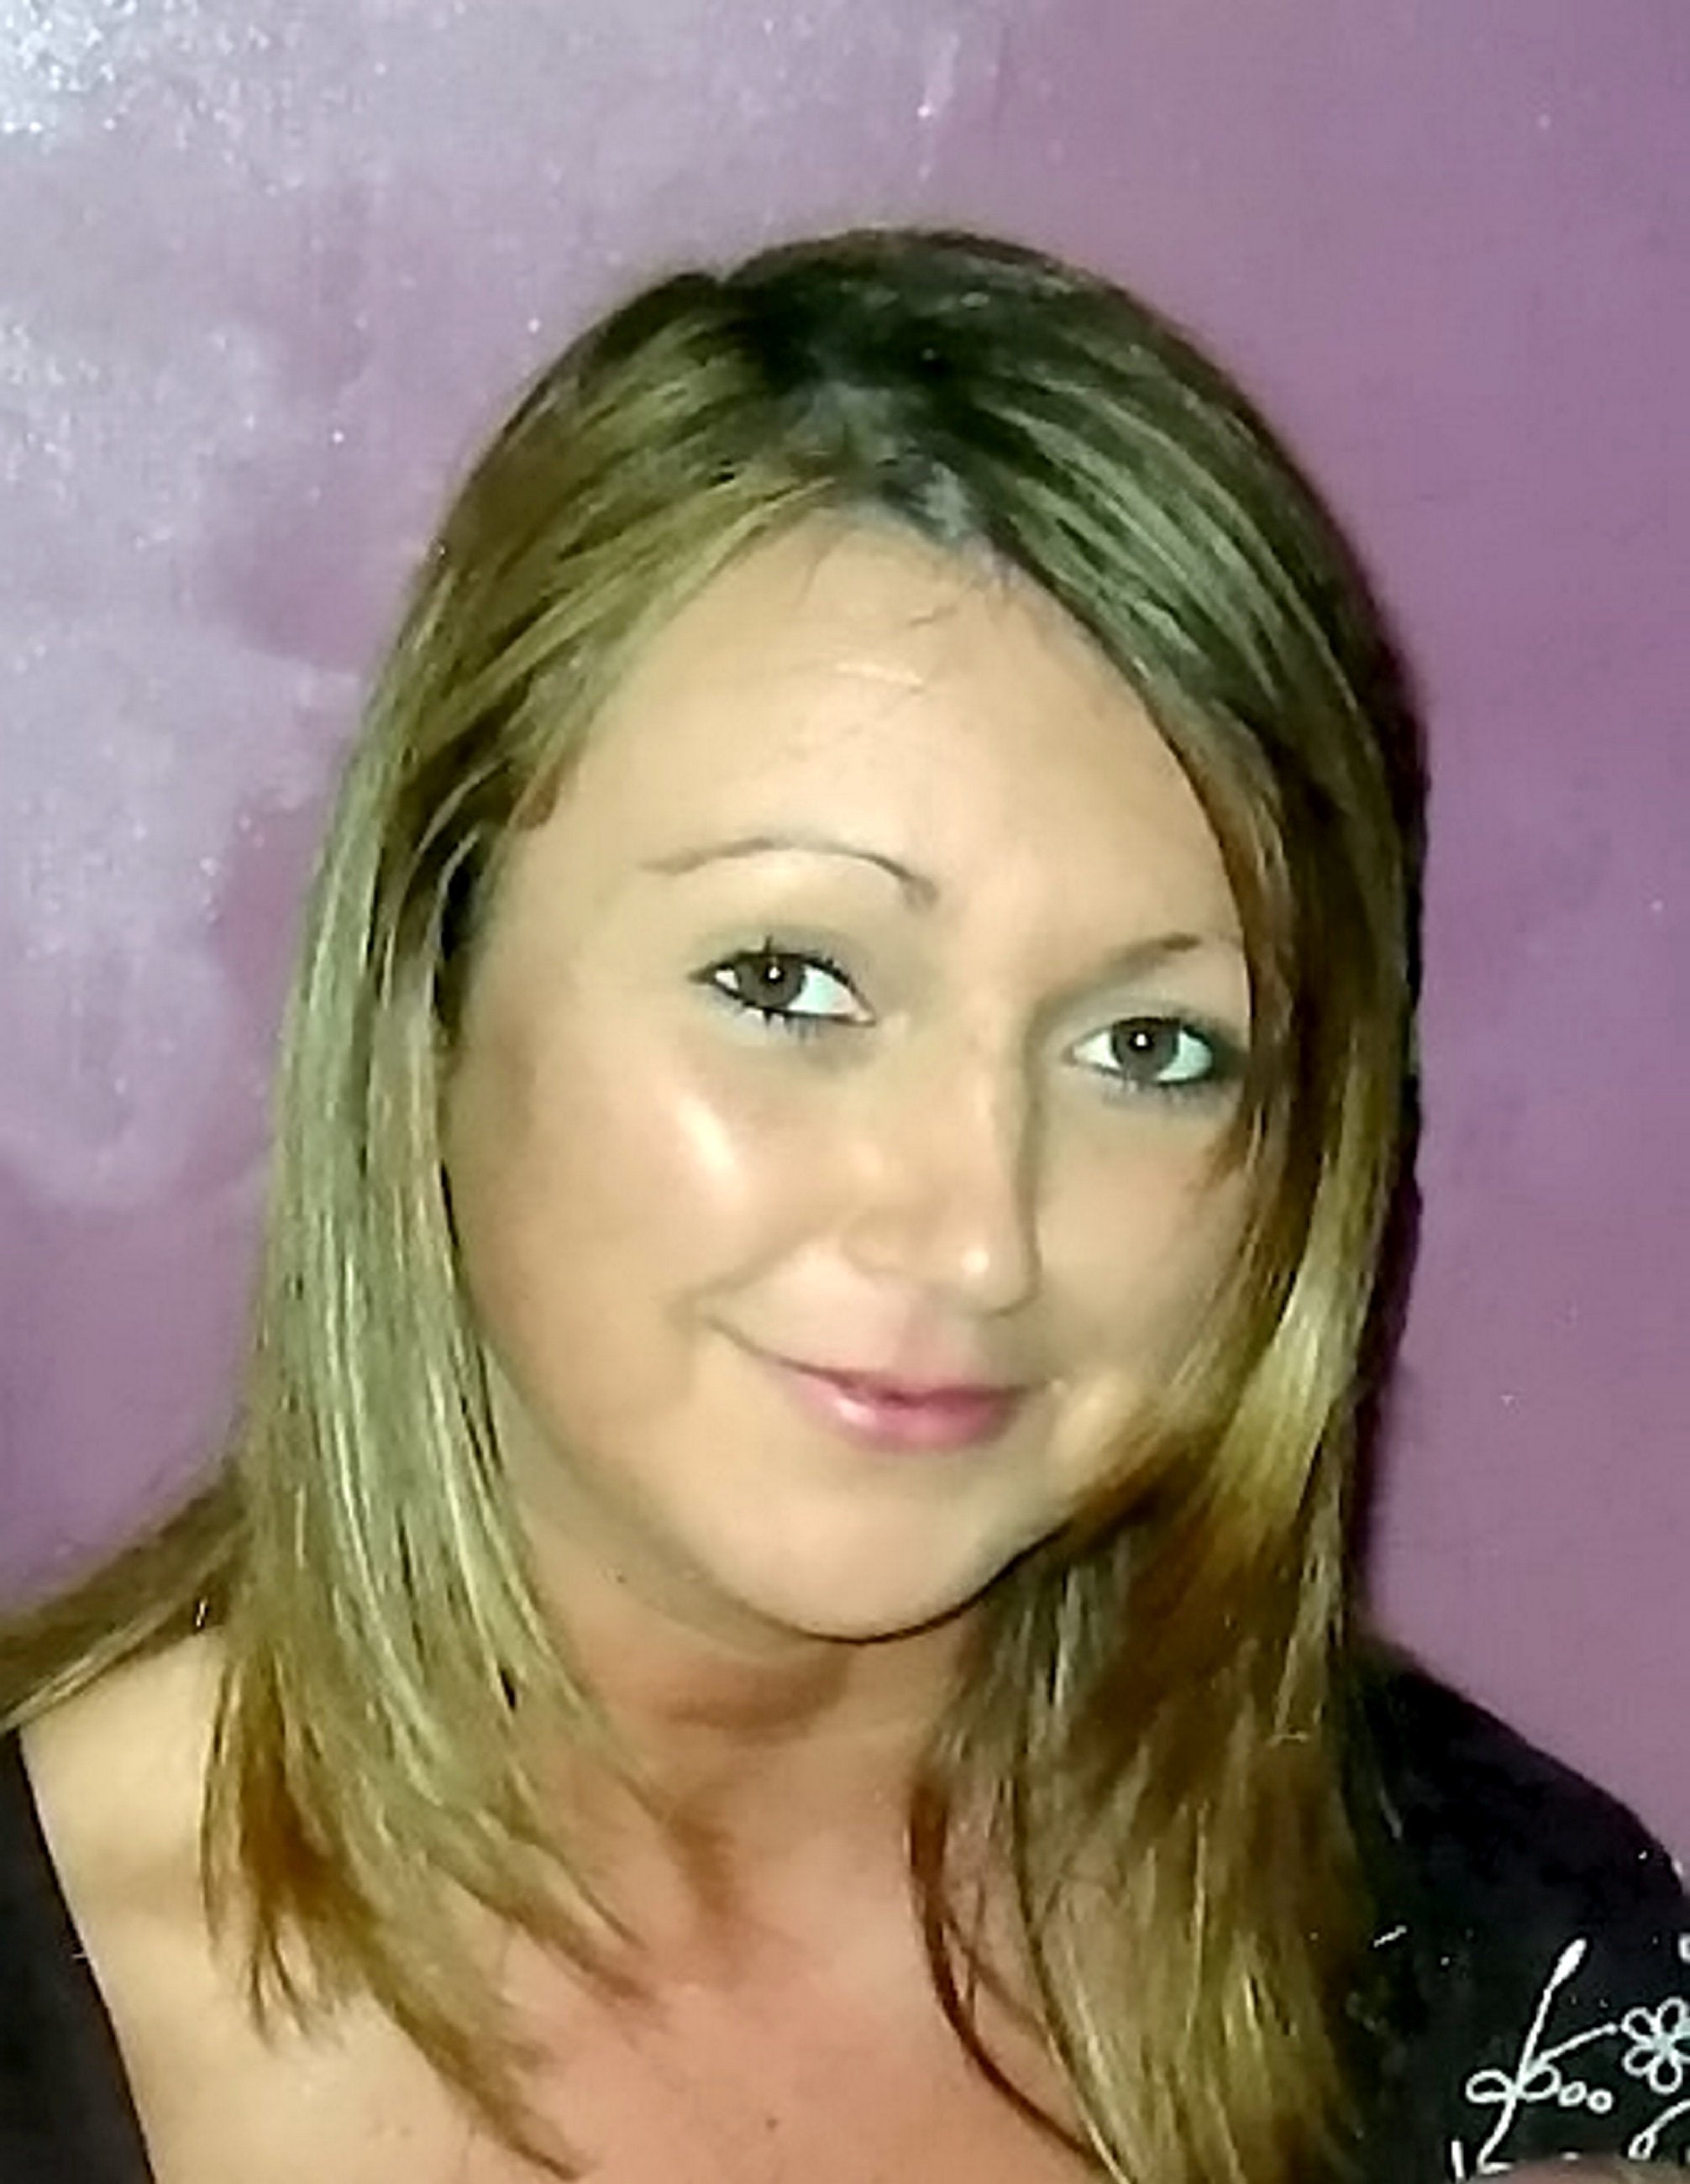 Claudia Lawrence who has been missing since 18 March 2009